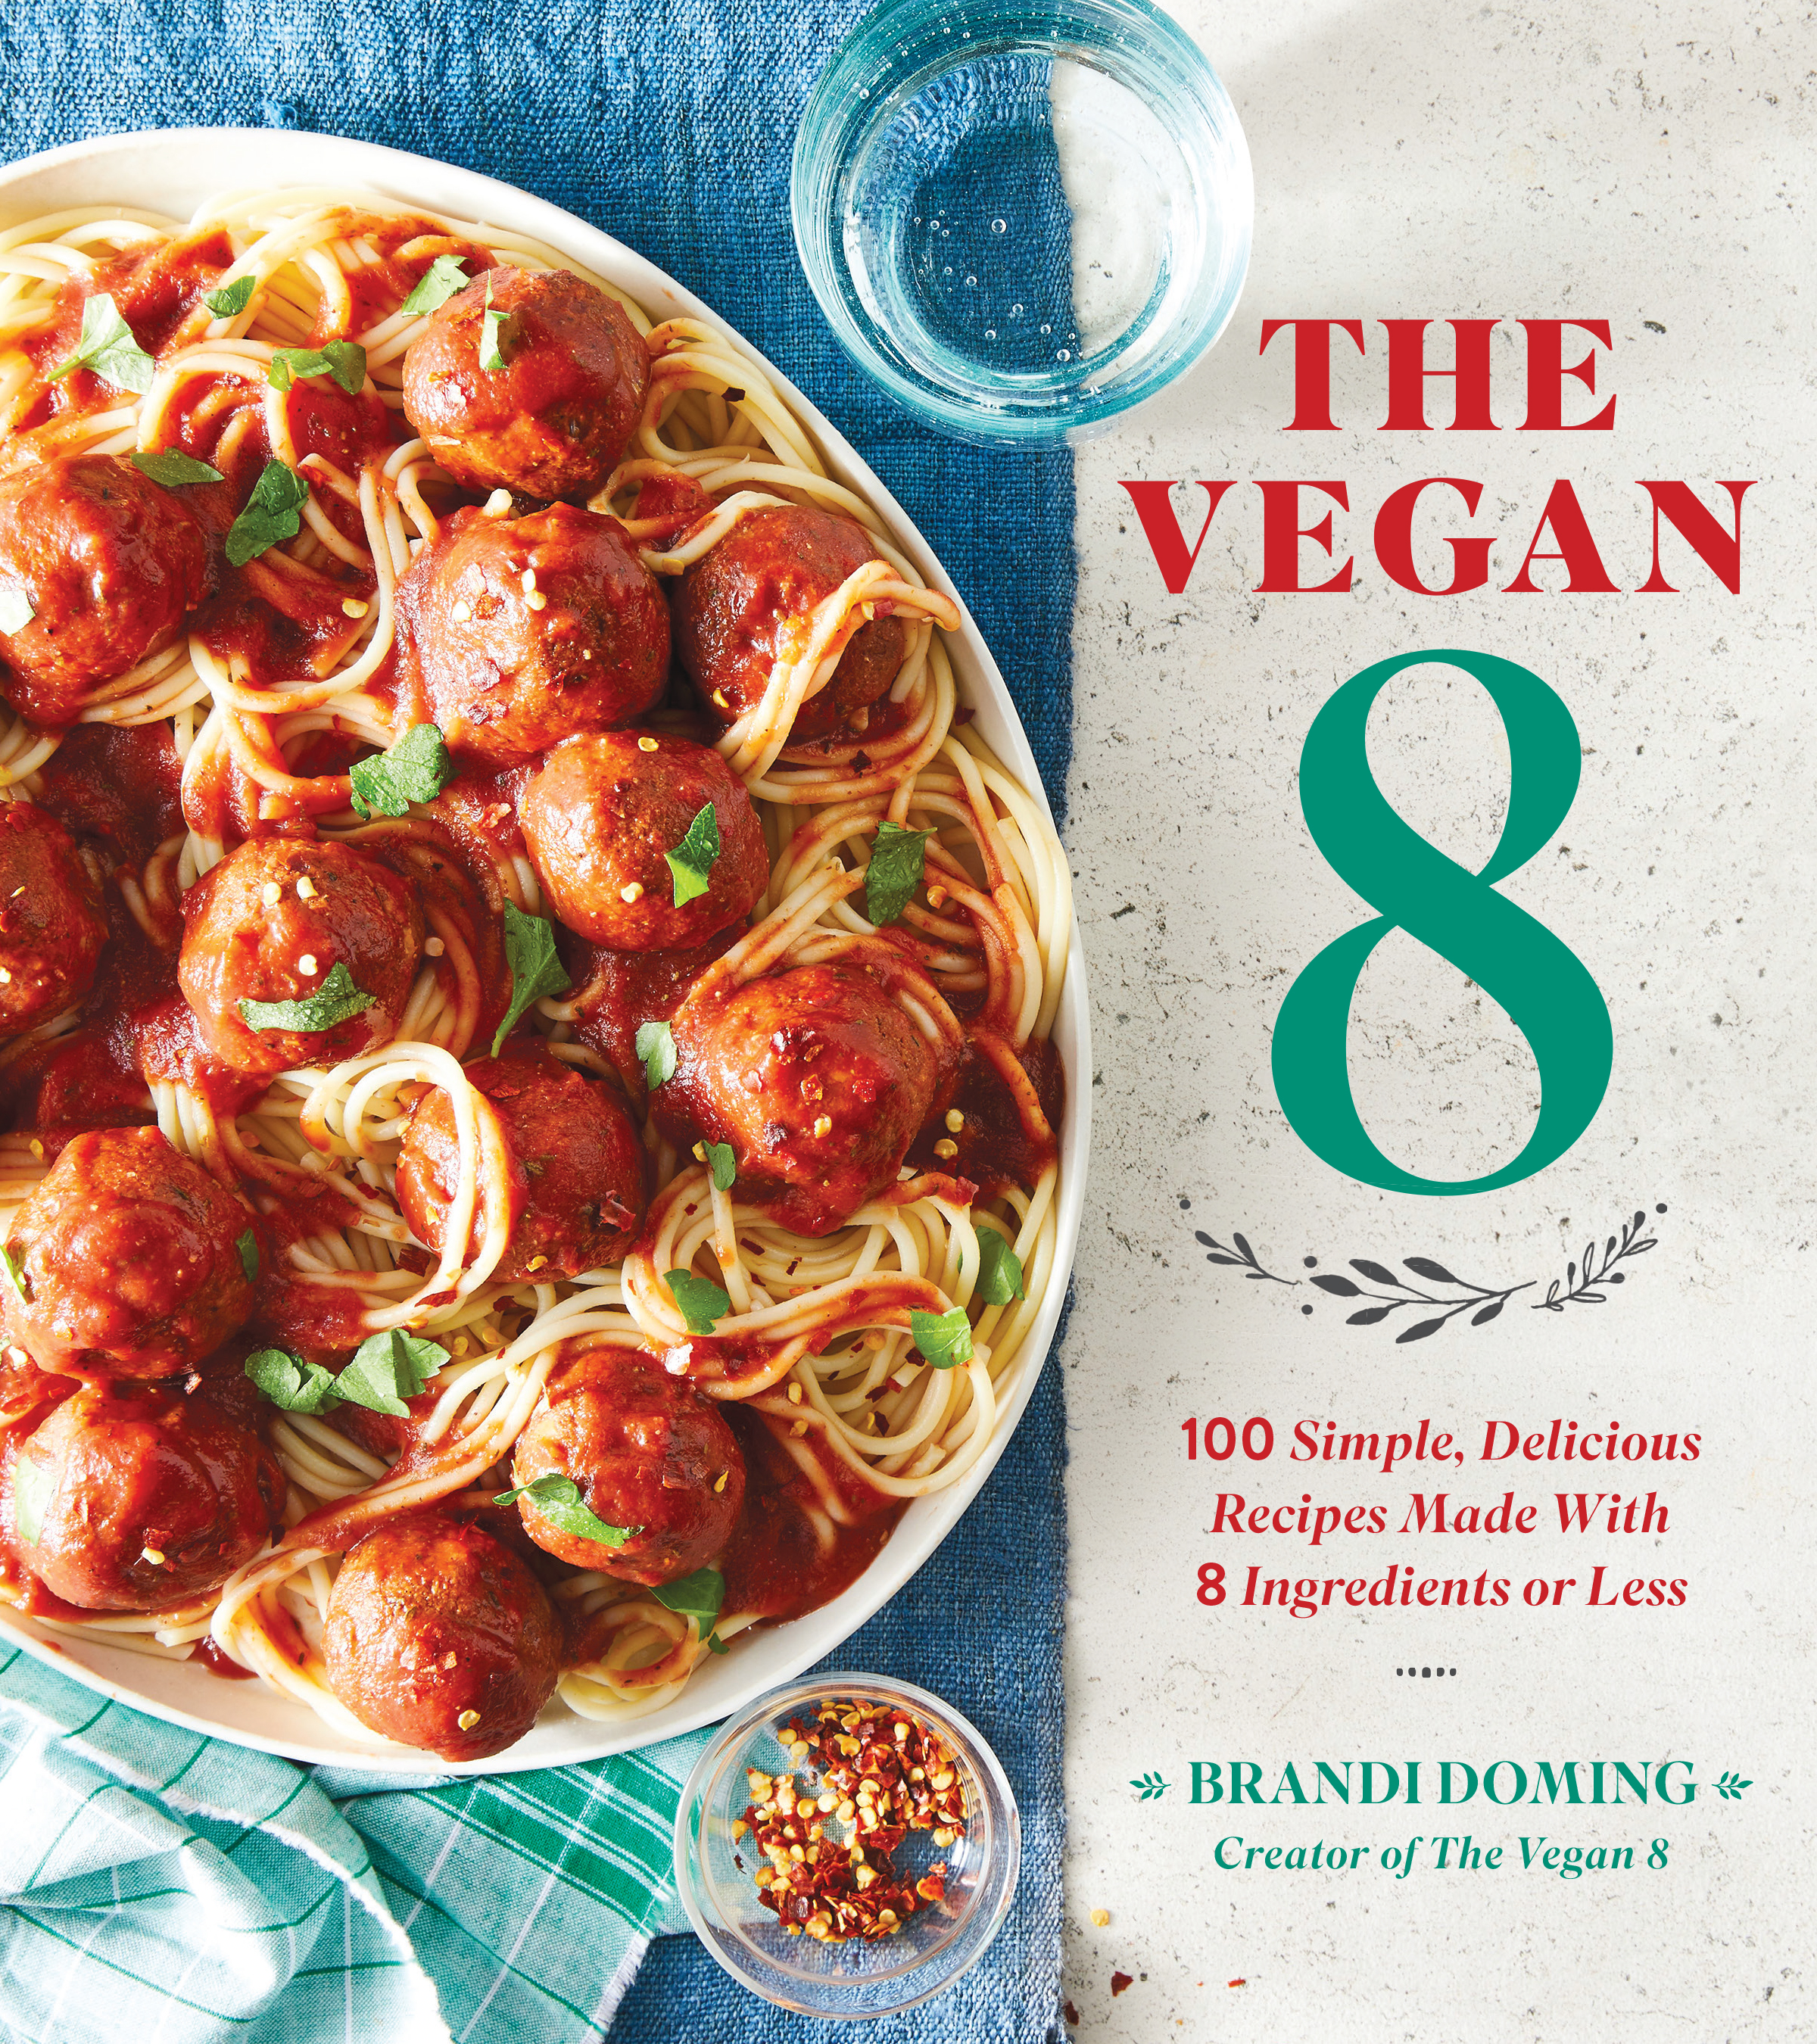 The Vegan 8 Cookbook :100 Simple, Delicious Recipes Made with 8 Ingredients or Less, by Brandi Doming.